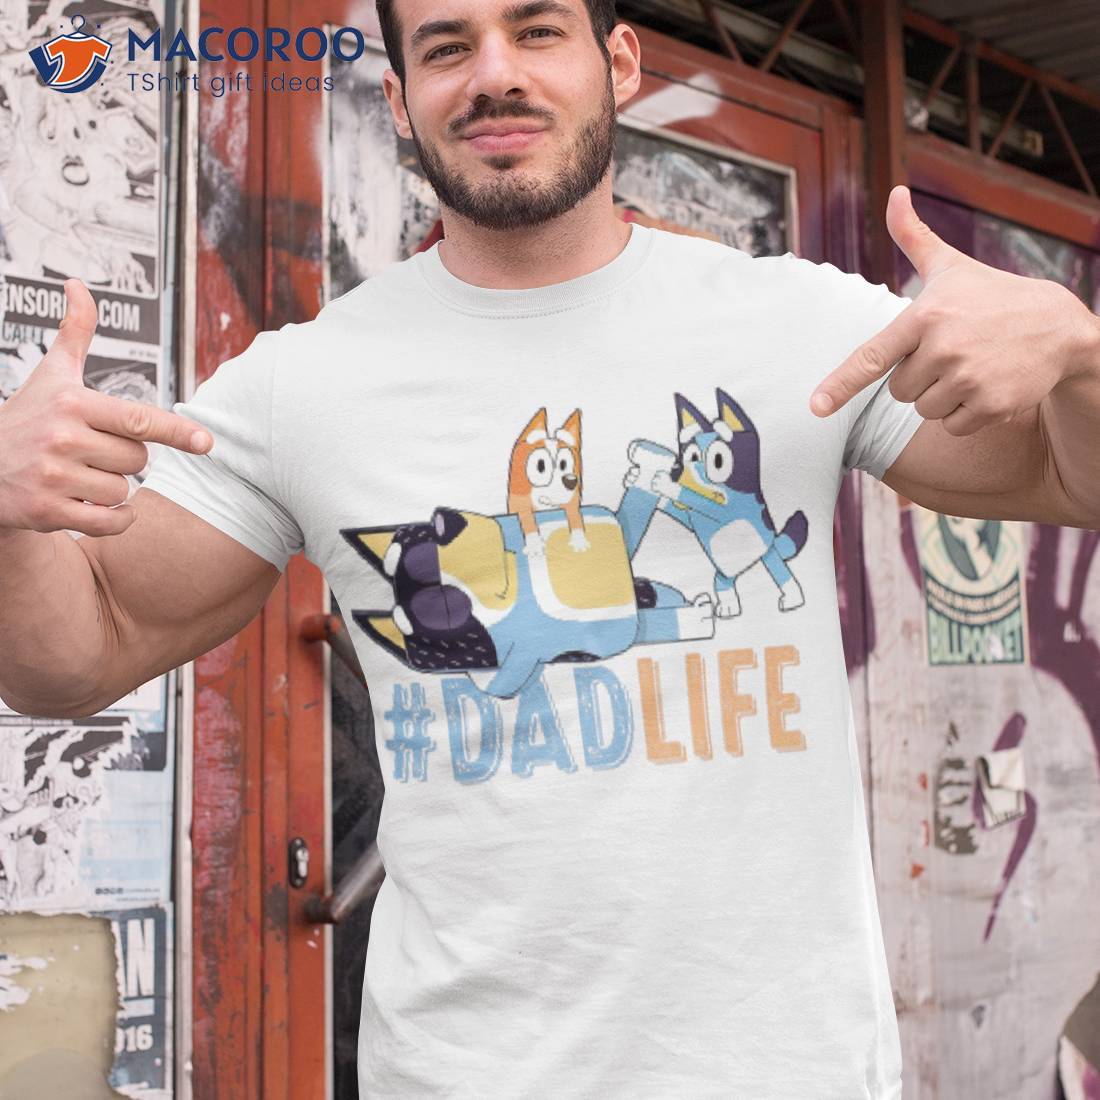 https://images.macoroo.com/wp-content/uploads/2023/06/bluey-dad-life-love-father-s-day-shirt-tshirt-1.jpg